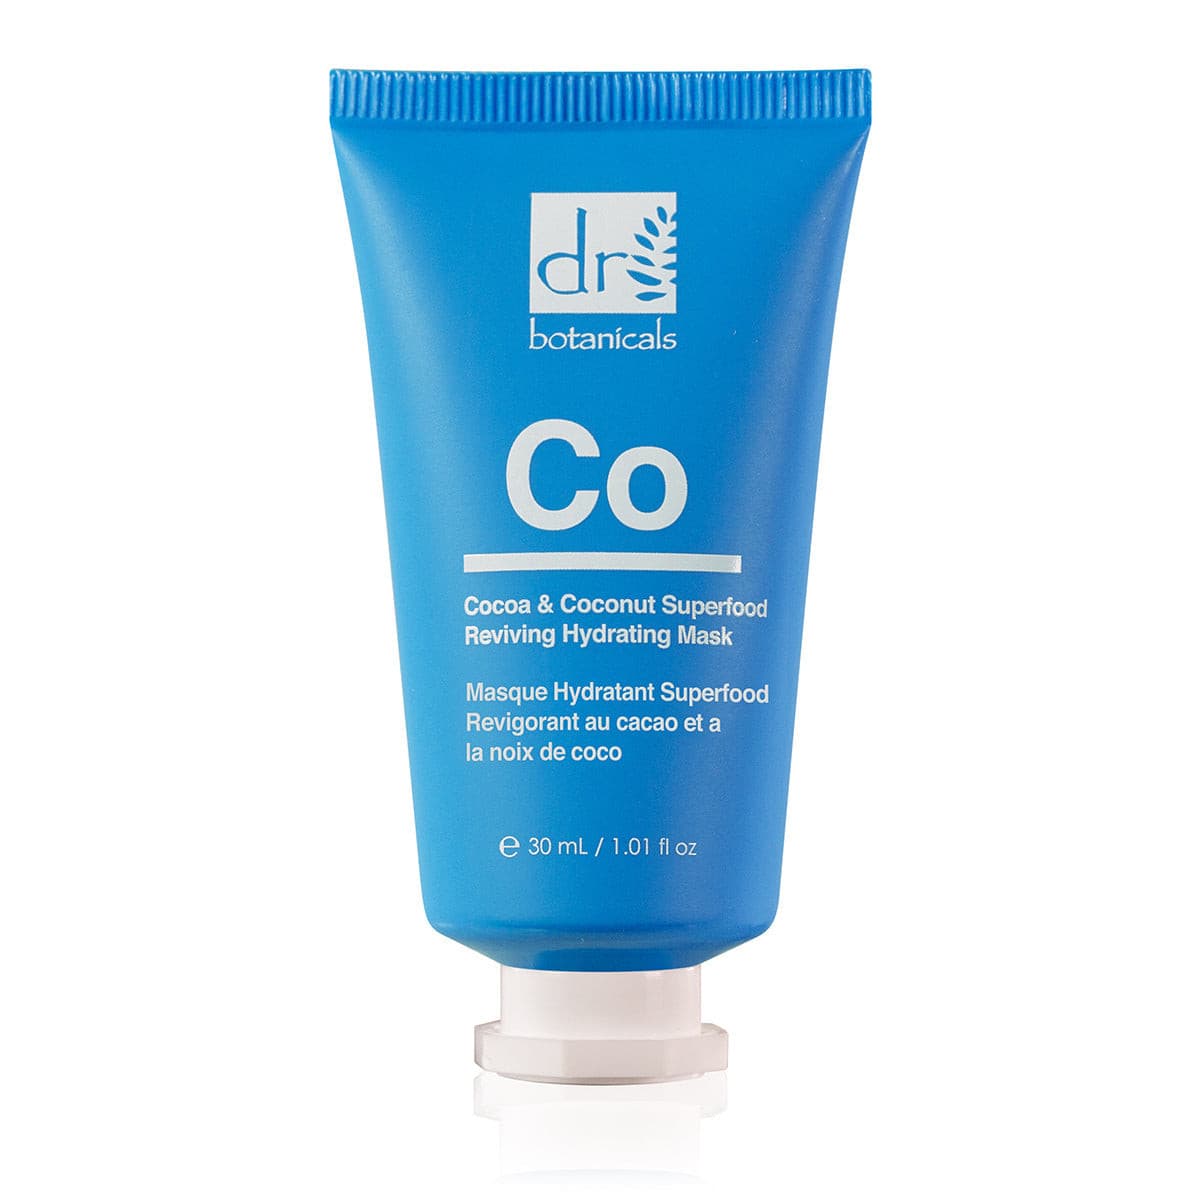 Cocoa & Coconut Superfood Reviving Hydrating Mask 30ml.